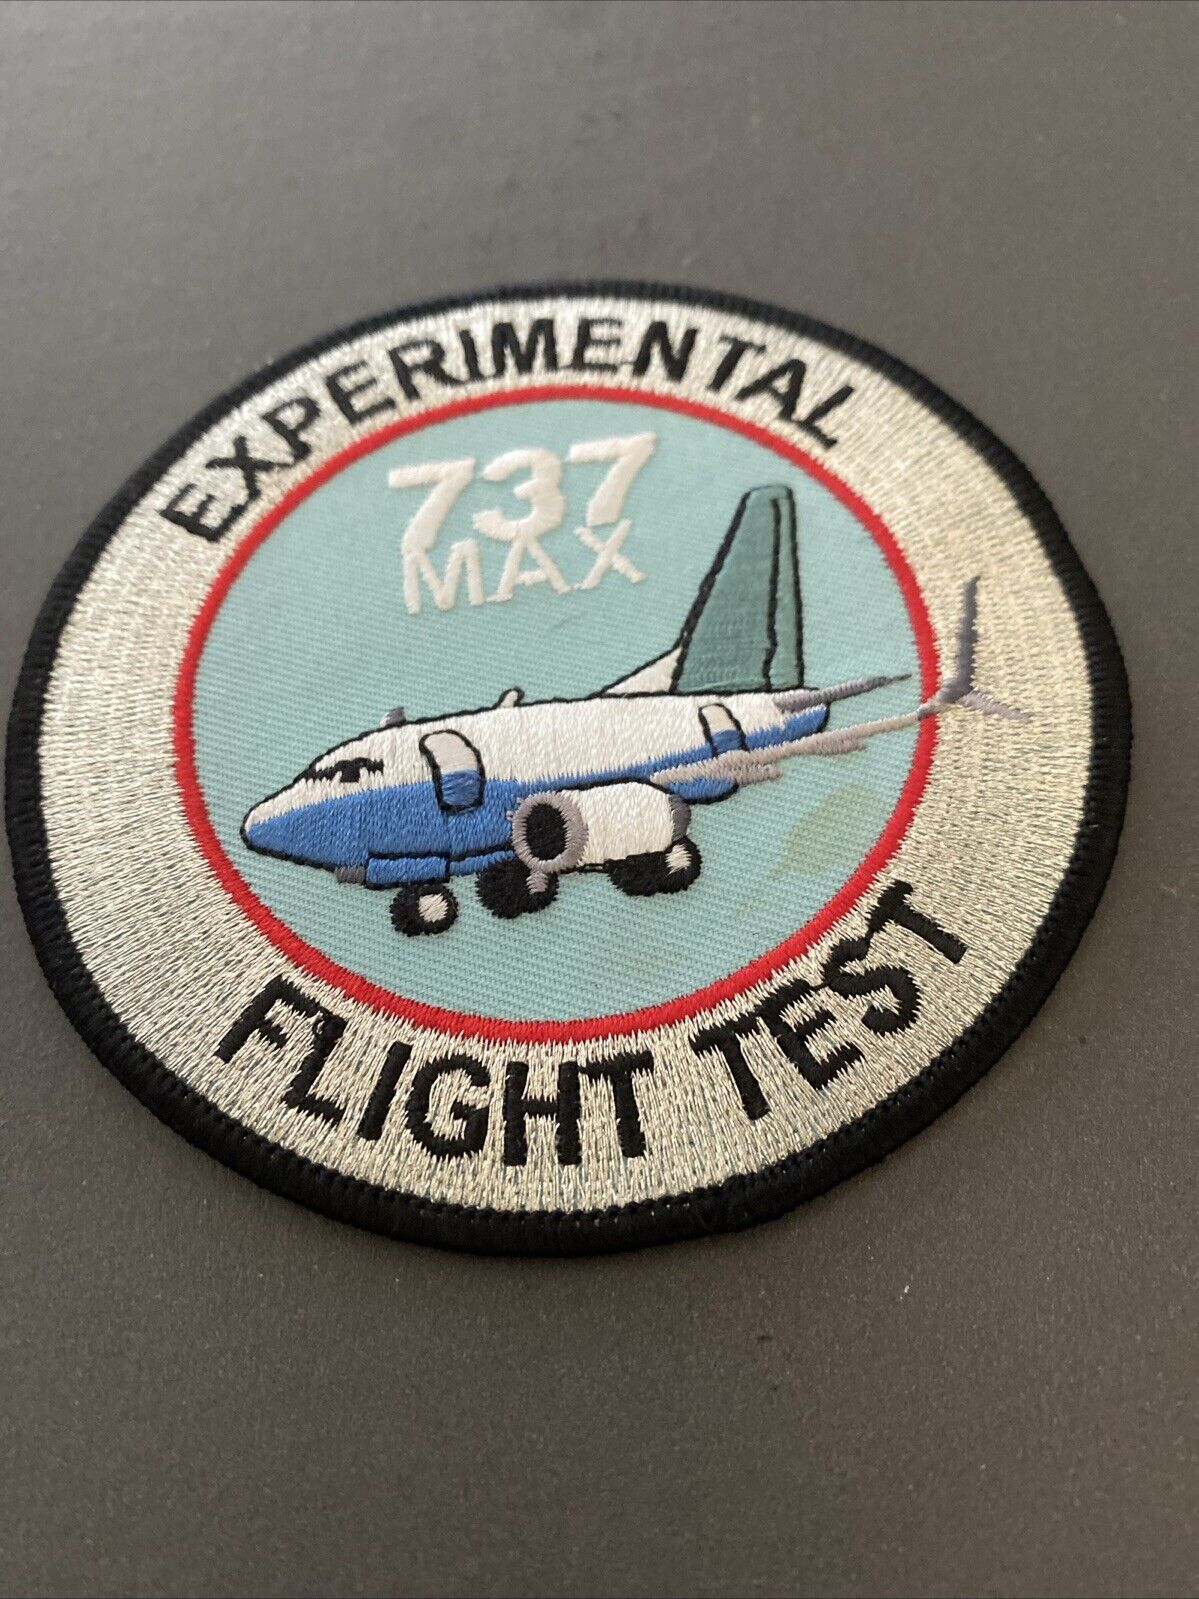 VTG 737 MAX Experimental Flight Test Iron On  Patch